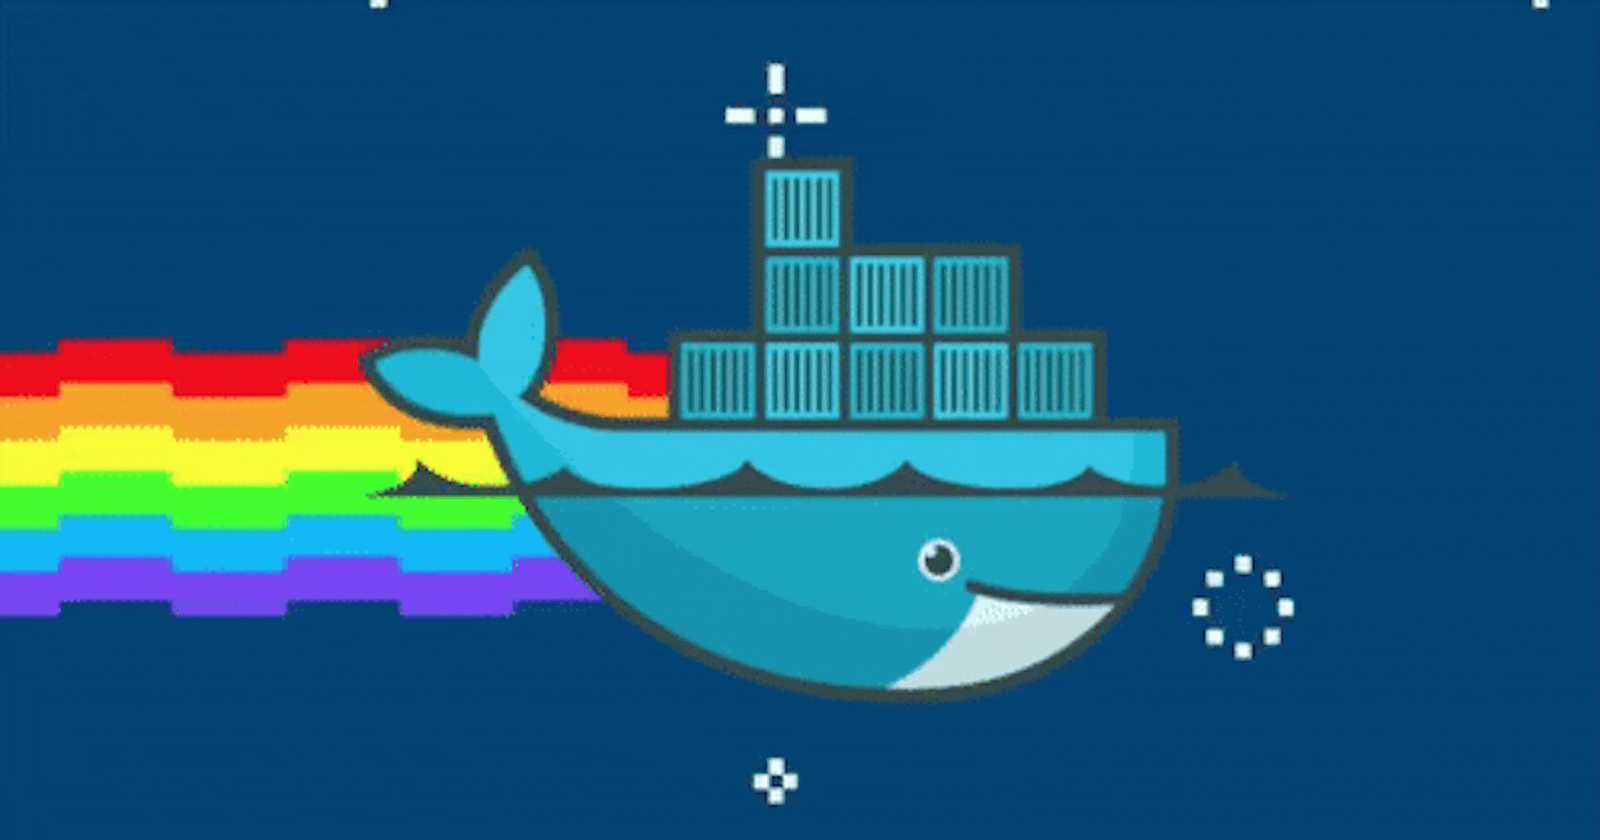 A Gentle Introduction to Docker